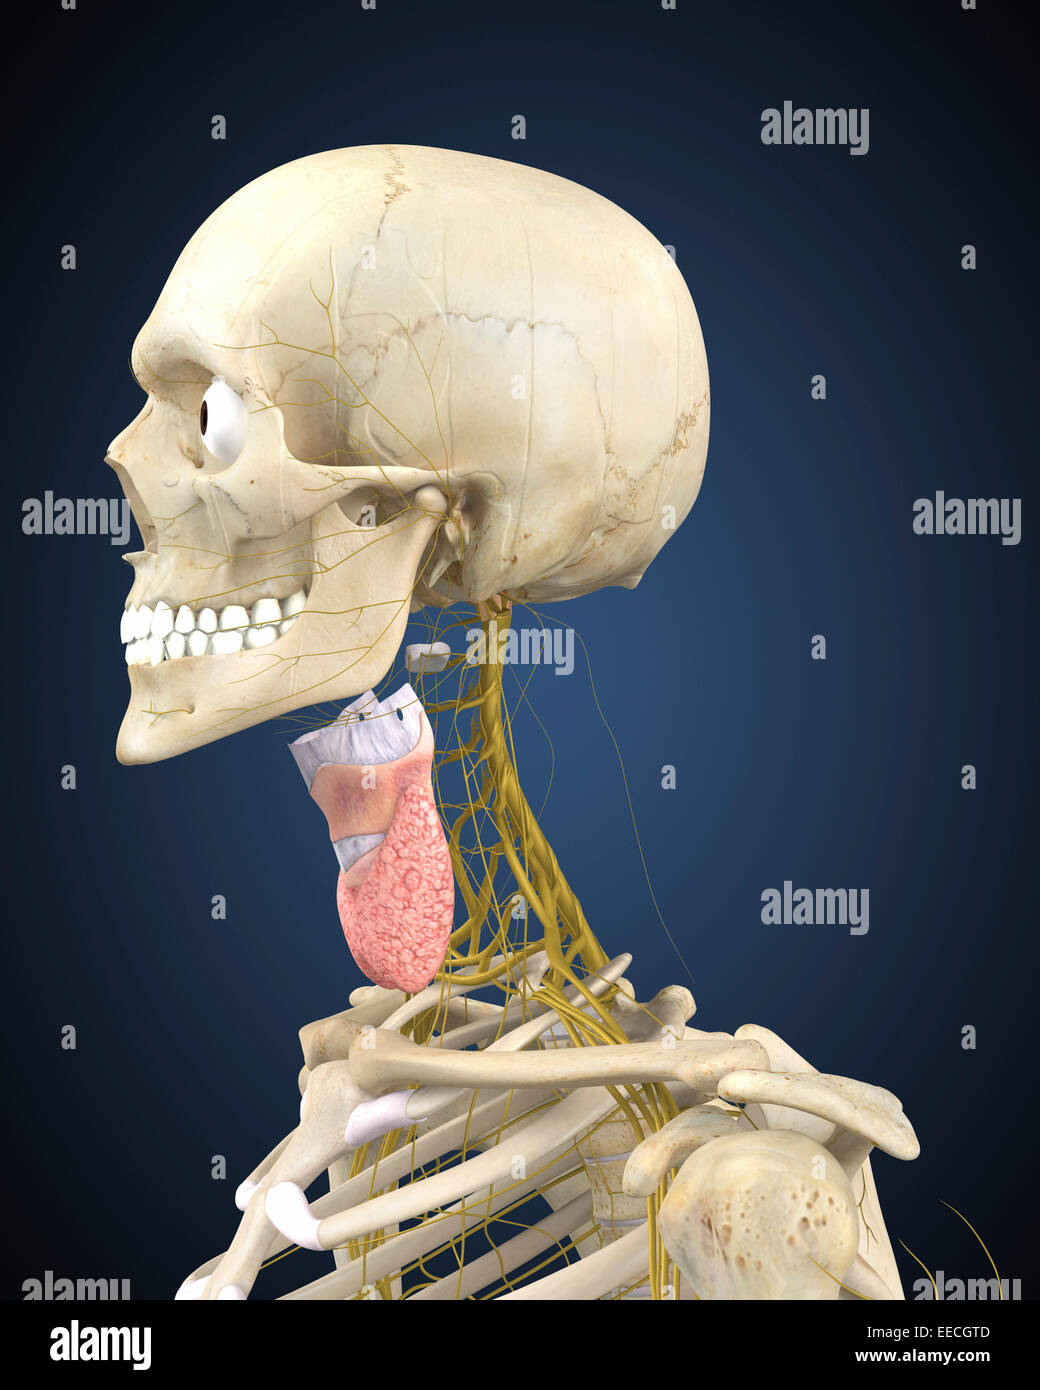 Human skeleton with nervous system and larynx organ of neck. Stock Photo